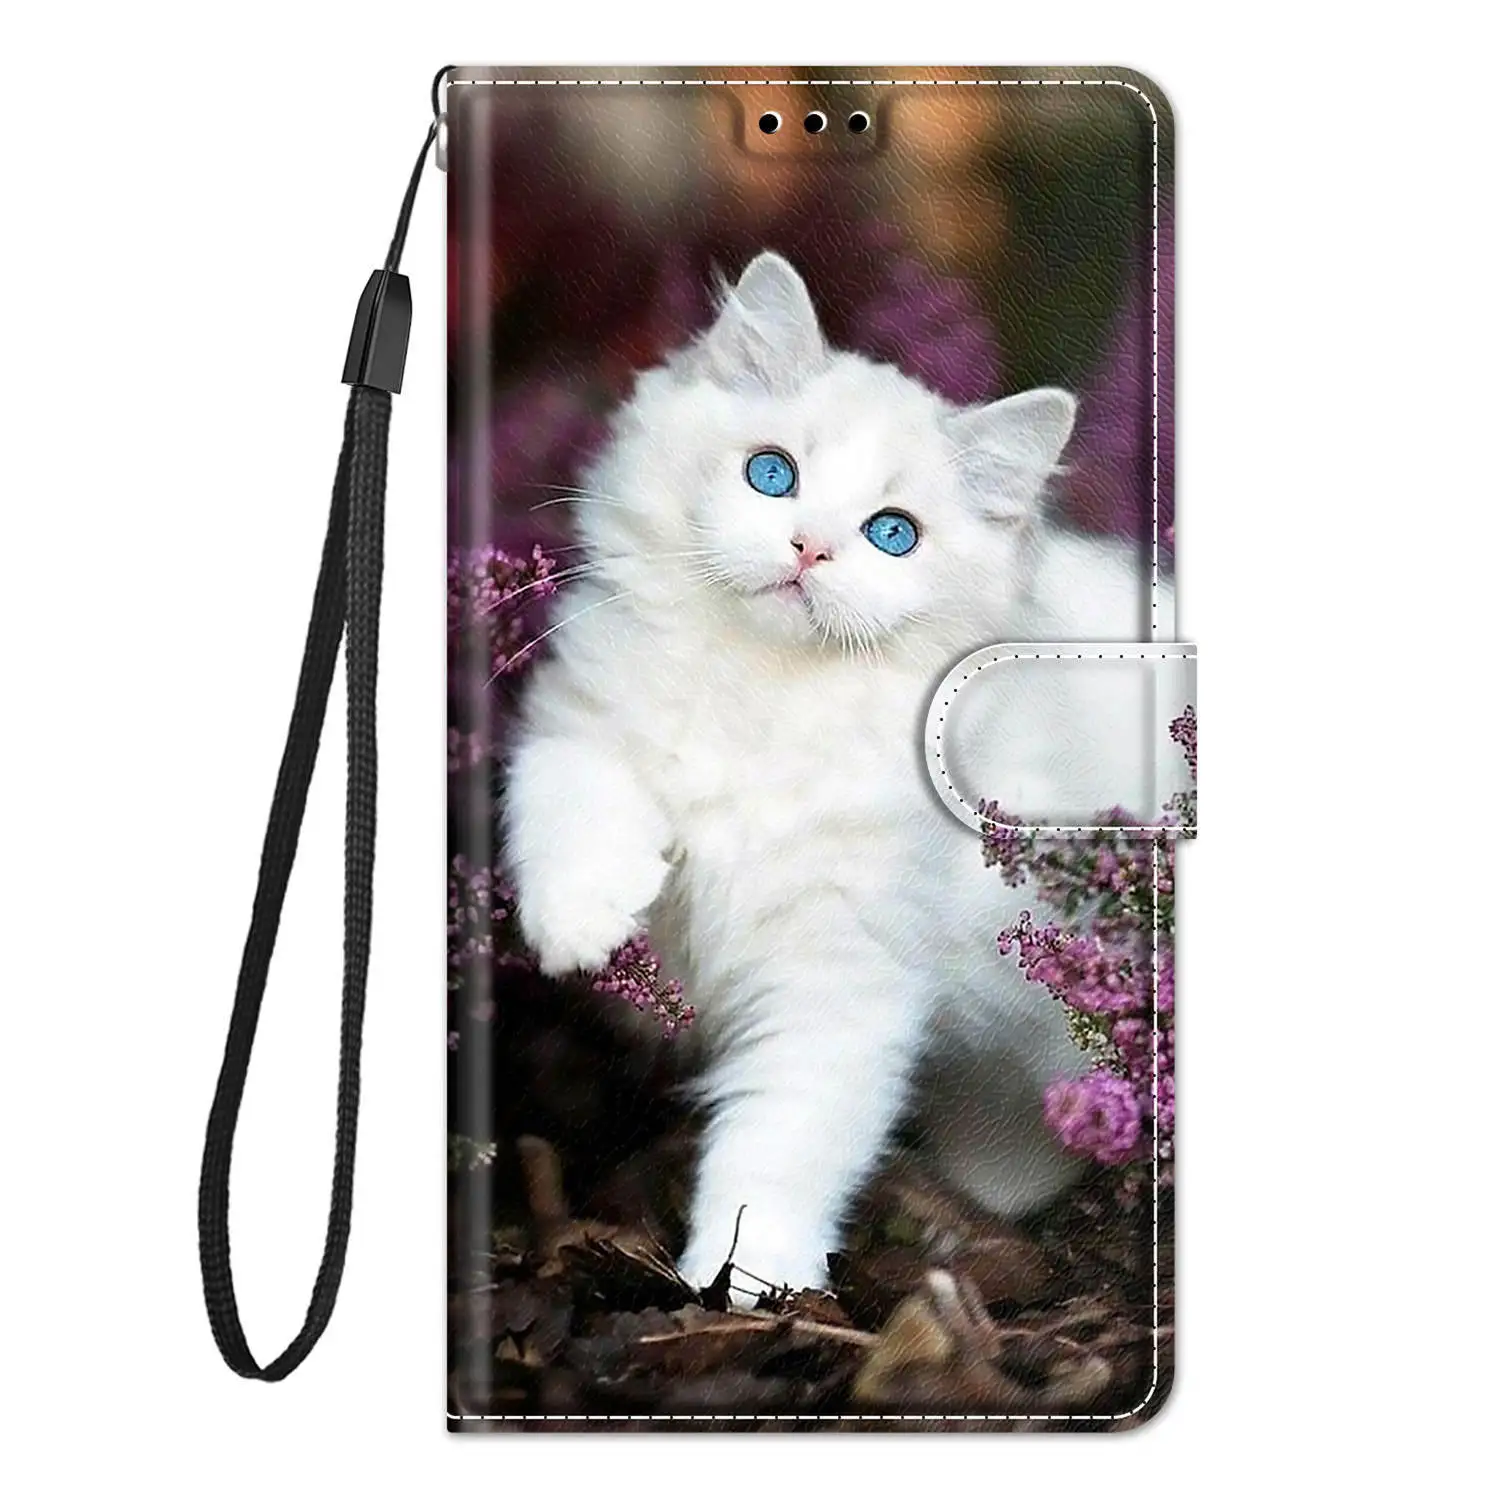 samsung cute phone cover Leather Flip Case on For Coque Samsung Galaxy A21s A12 A11 A51 A71 A30S a10 A105FN/DS A105G Luxury Stand Phone Wallet Cover Etui cute phone cases for samsung  Cases For Samsung